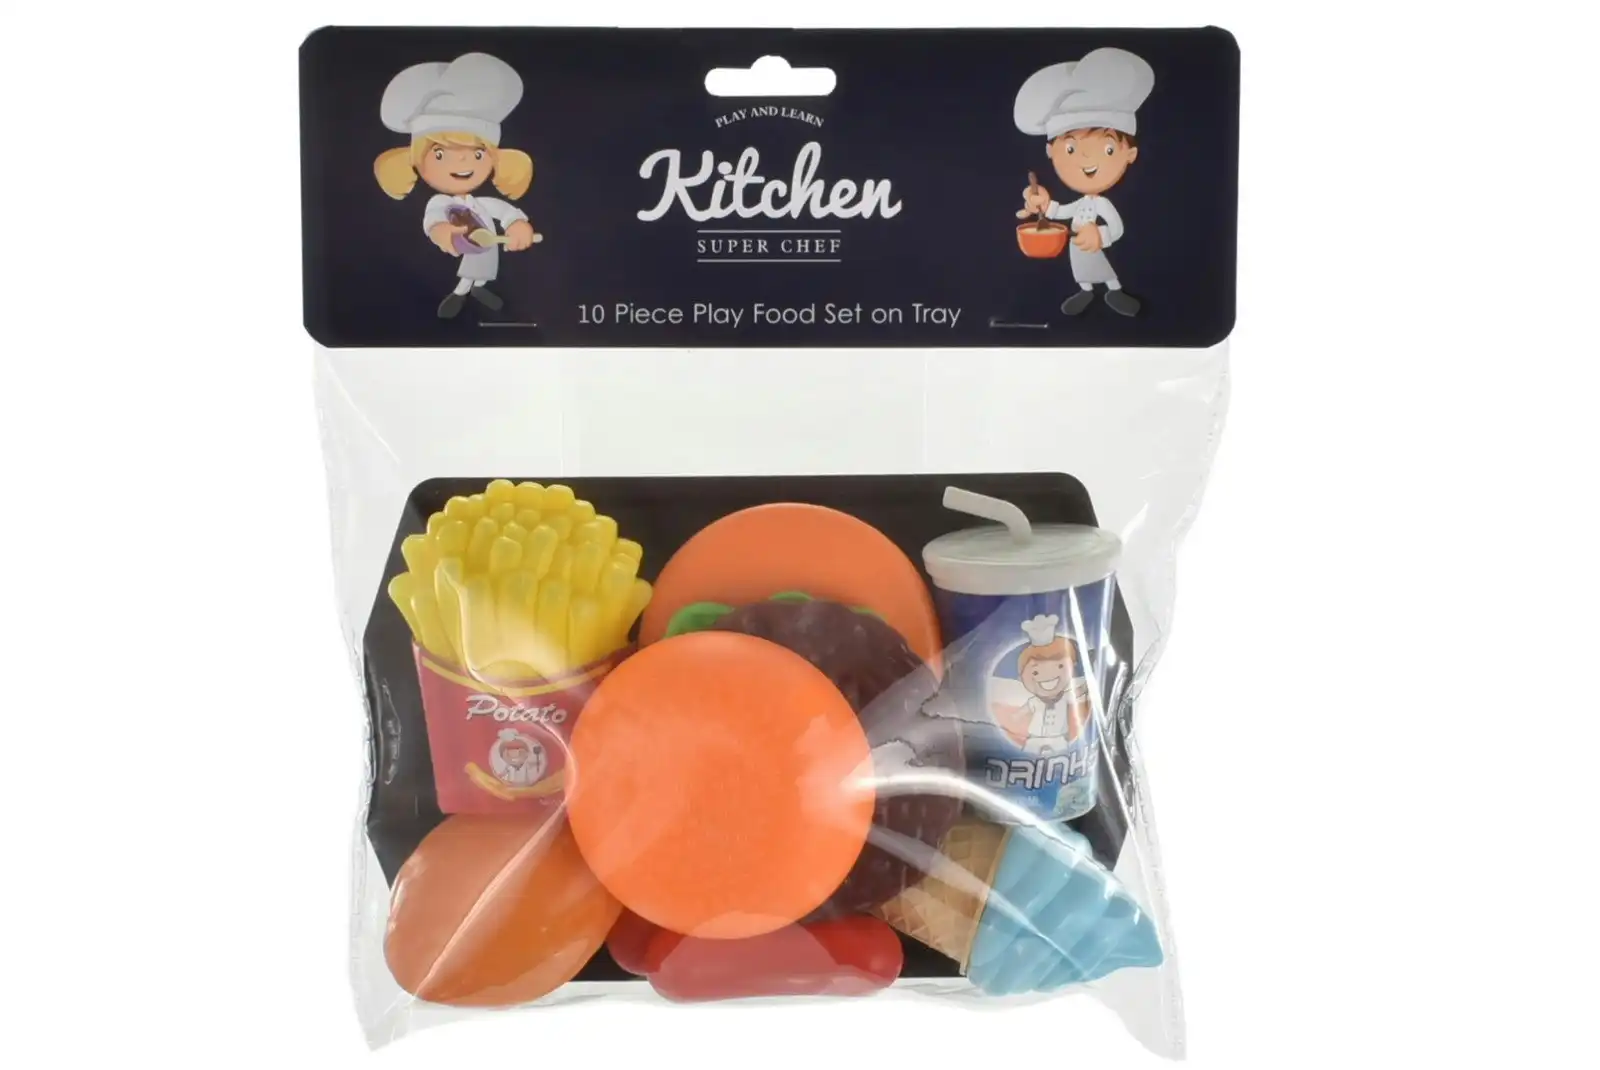 Play Food Set On Tray 10pc